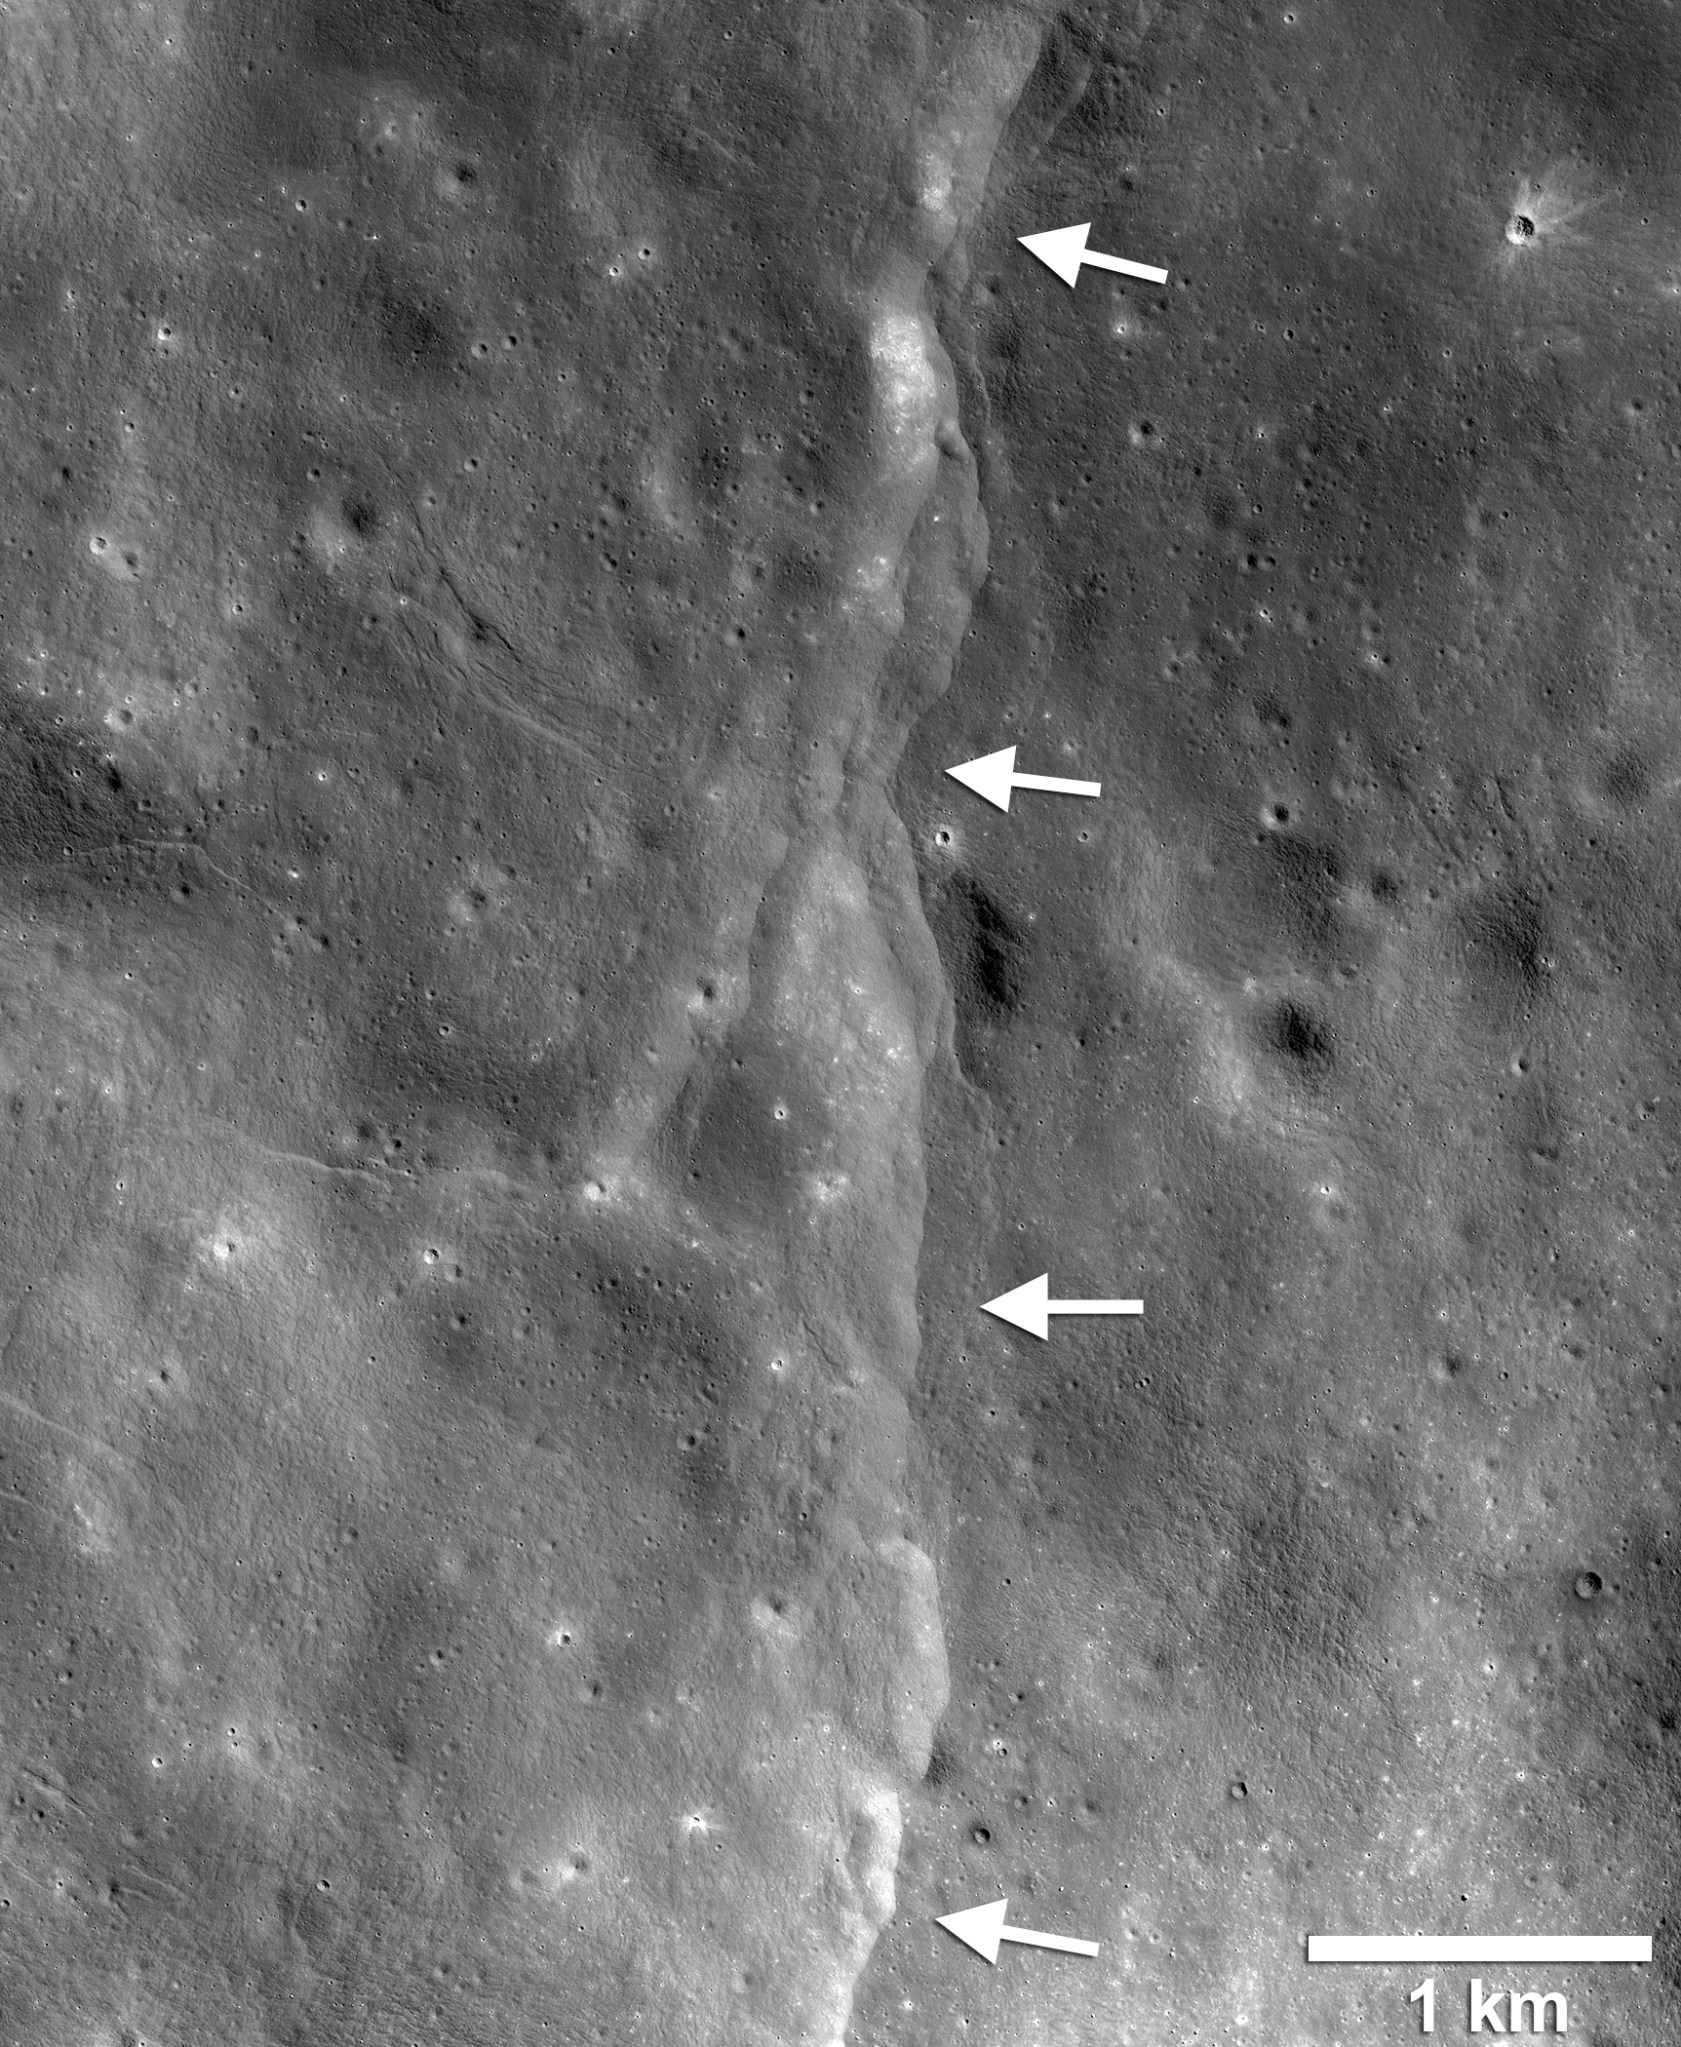 lunar topography with arrows